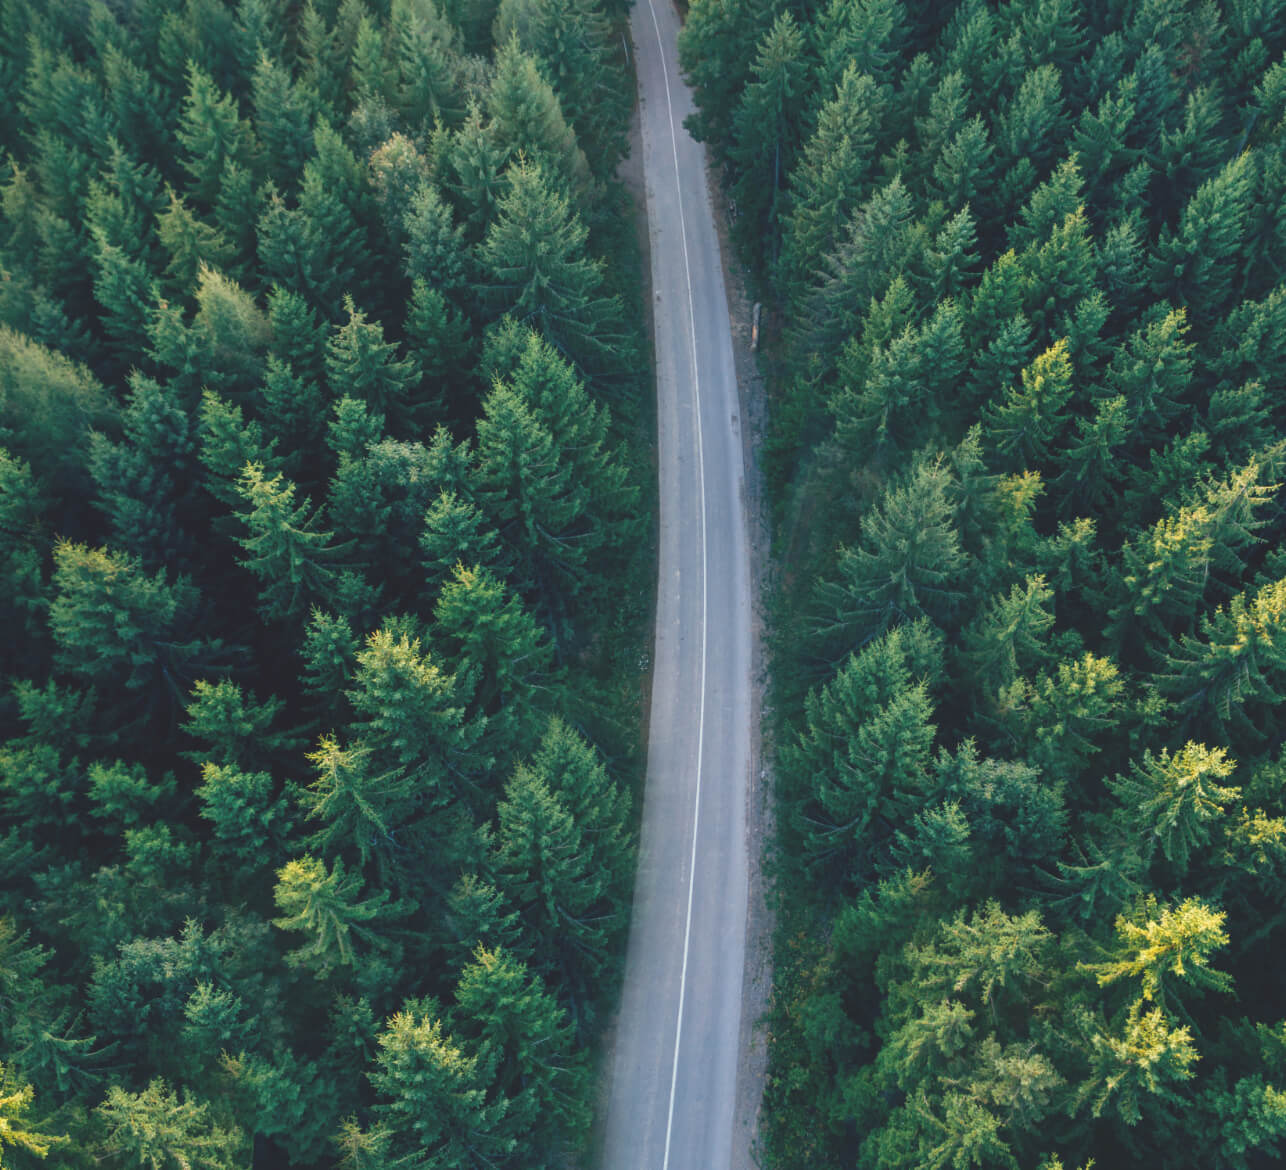 an overhead shot of a forest with a road running through it